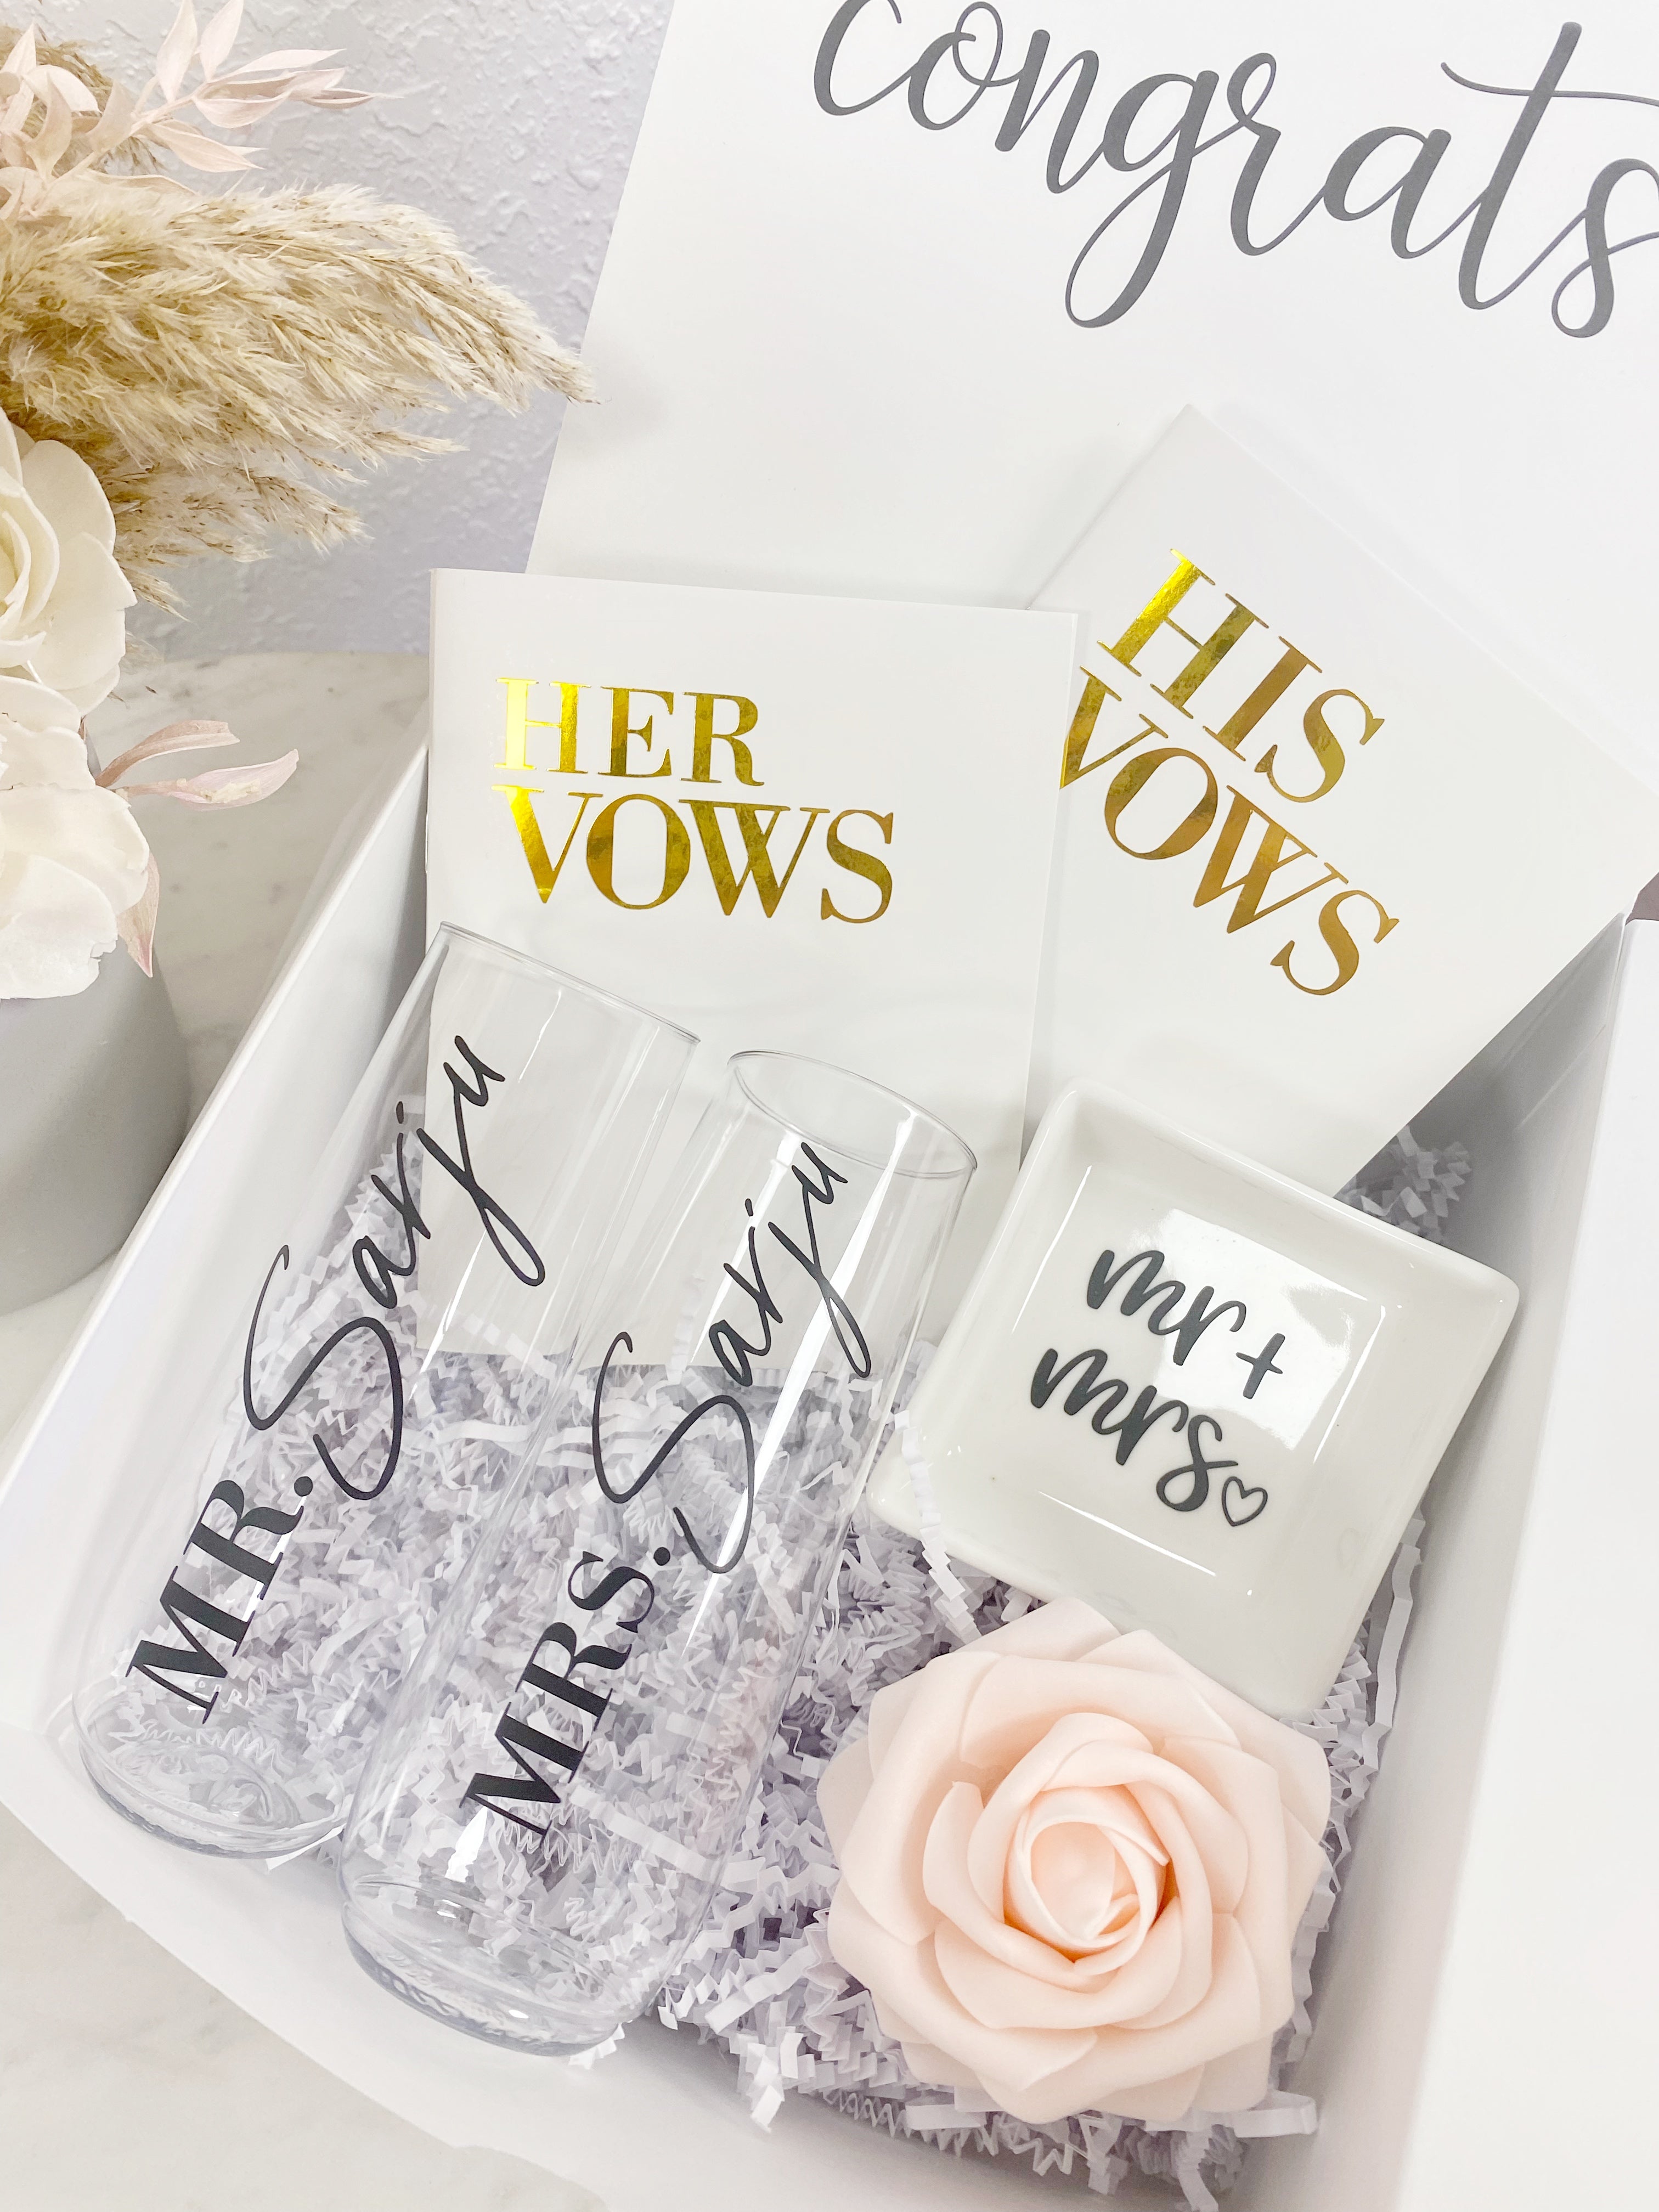 Bride and groom engagement gift box set for couple- mr and mrs engagement gift box set- champagne flutes vow books ring dish gift set for mr